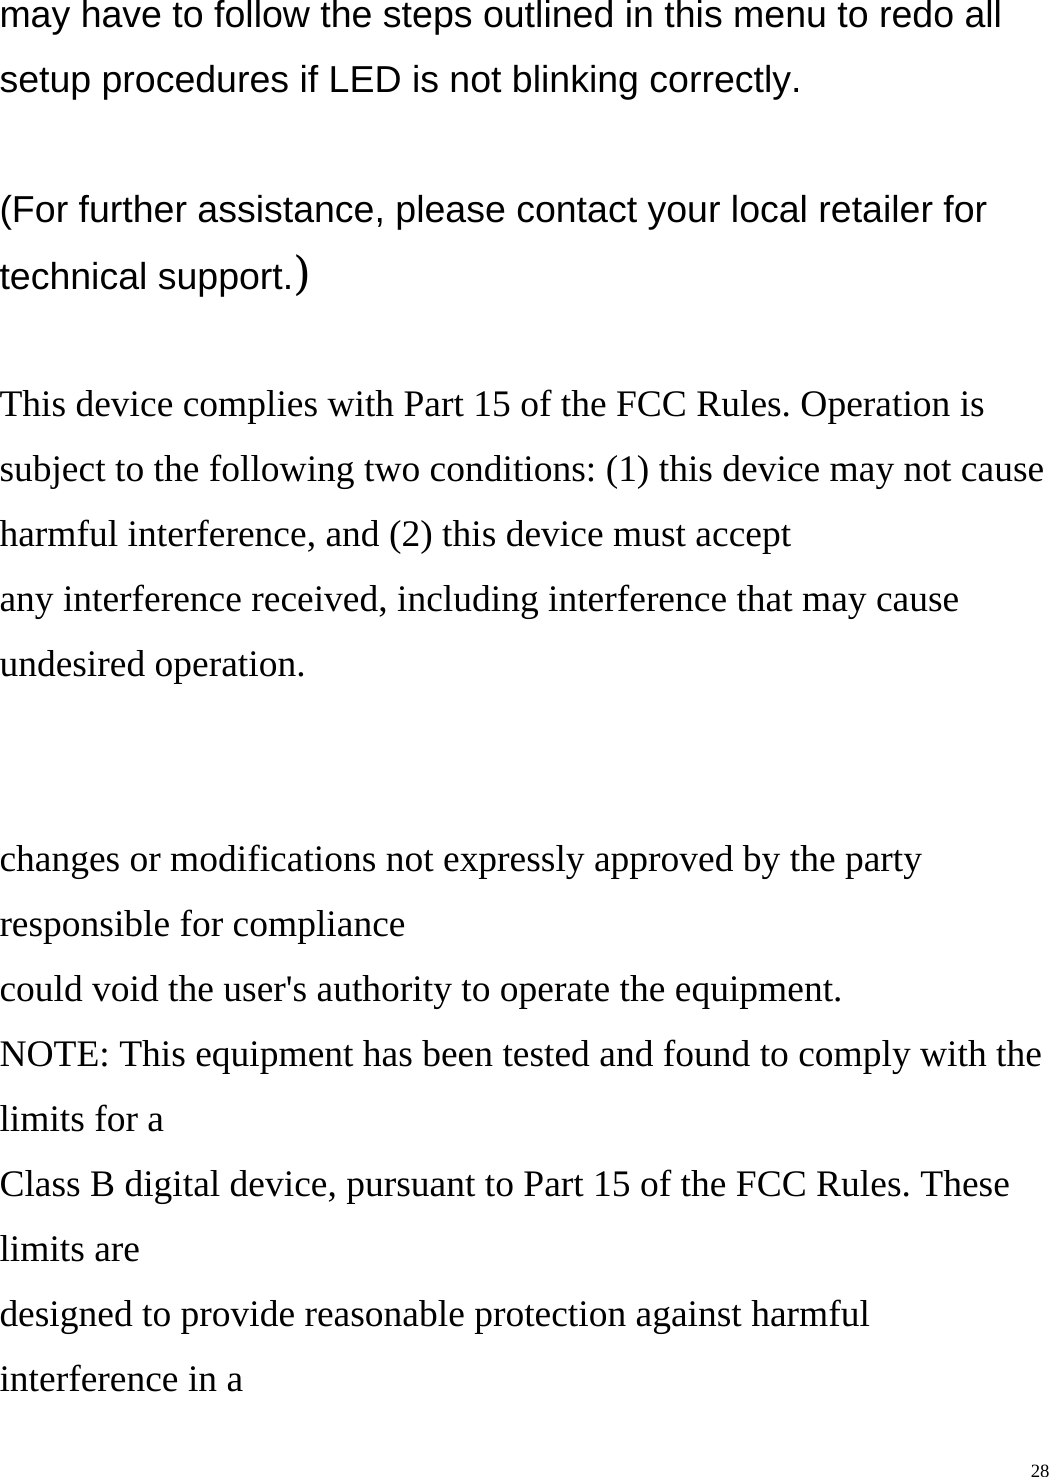    28may have to follow the steps outlined in this menu to redo all setup procedures if LED is not blinking correctly.  (For further assistance, please contact your local retailer for technical support.)  This device complies with Part 15 of the FCC Rules. Operation is subject to the following two conditions: (1) this device may not cause harmful interference, and (2) this device must accept any interference received, including interference that may cause undesired operation.   changes or modifications not expressly approved by the party responsible for compliance could void the user&apos;s authority to operate the equipment. NOTE: This equipment has been tested and found to comply with the limits for a Class B digital device, pursuant to Part 15 of the FCC Rules. These limits are designed to provide reasonable protection against harmful interference in a 